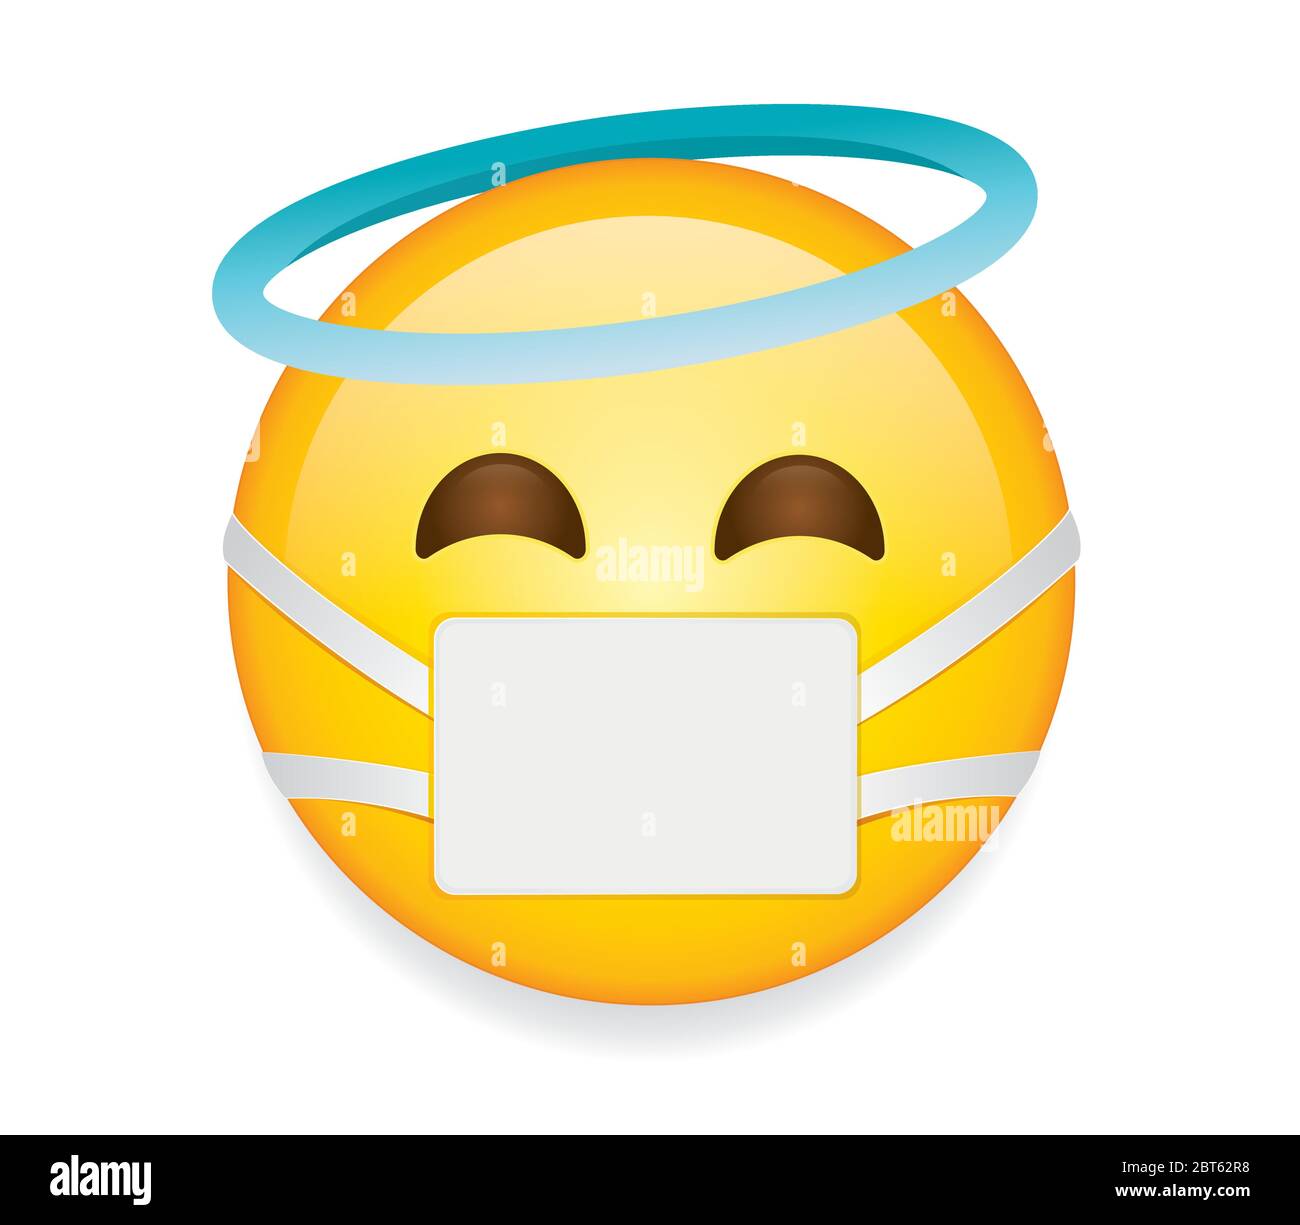 High quality emoticon on white background vector.Emoji Smiling Face With Halo and mask.Yellow smiley face  with mask, smiling, eyes, and blue halo. Stock Vector